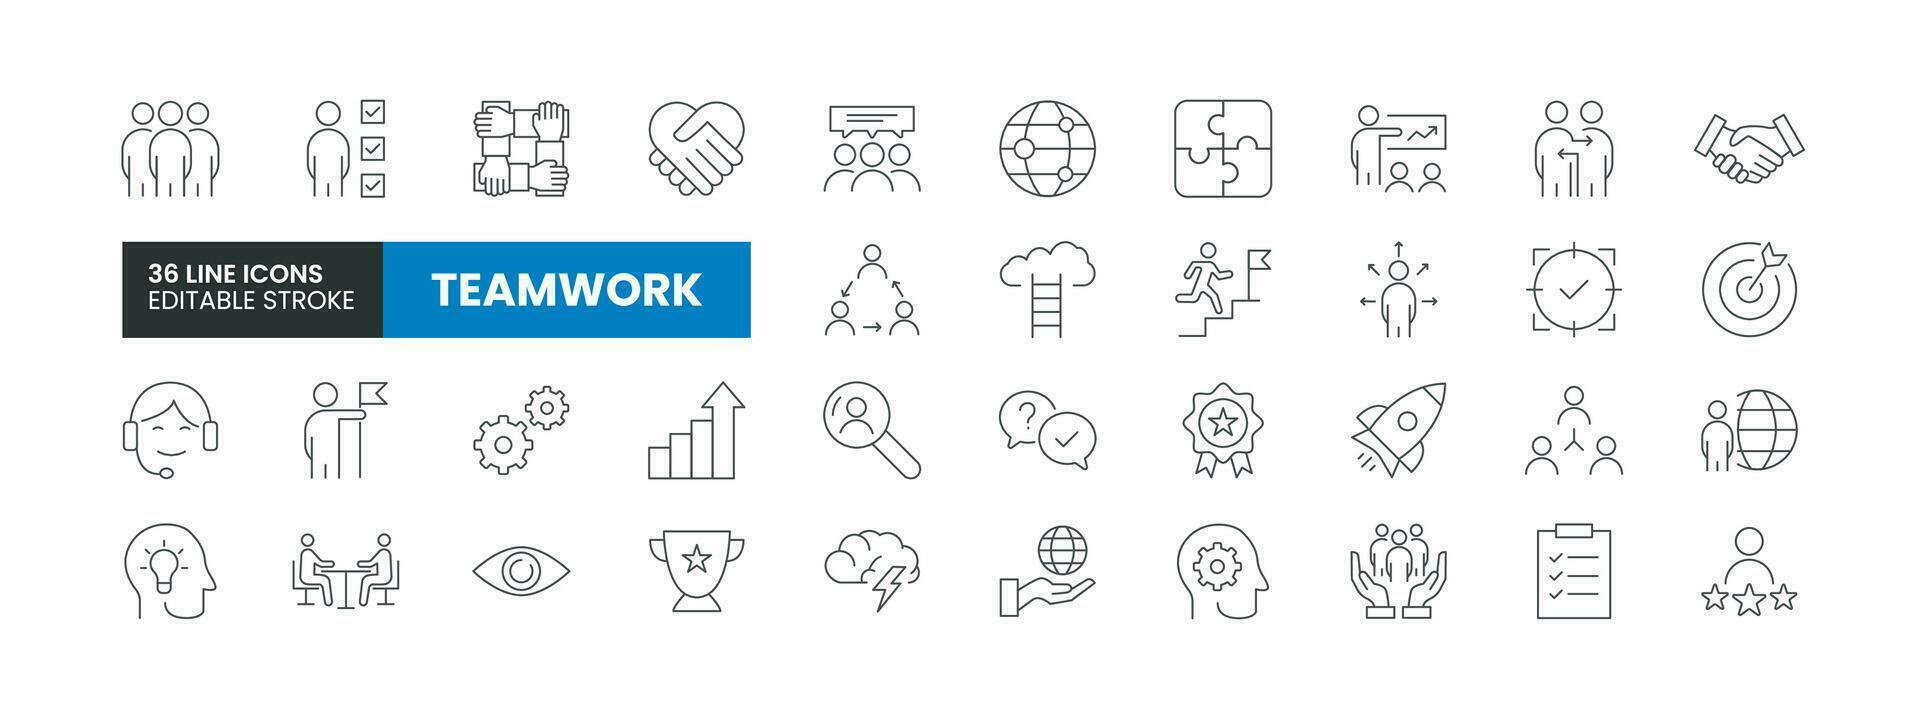 Set of 36 Teamwork line icons set. Teamwork outline icons with editable stroke collection. Includes Collaboration, Research, Outsourcing, Teamwork, Brainstorming and More. vector